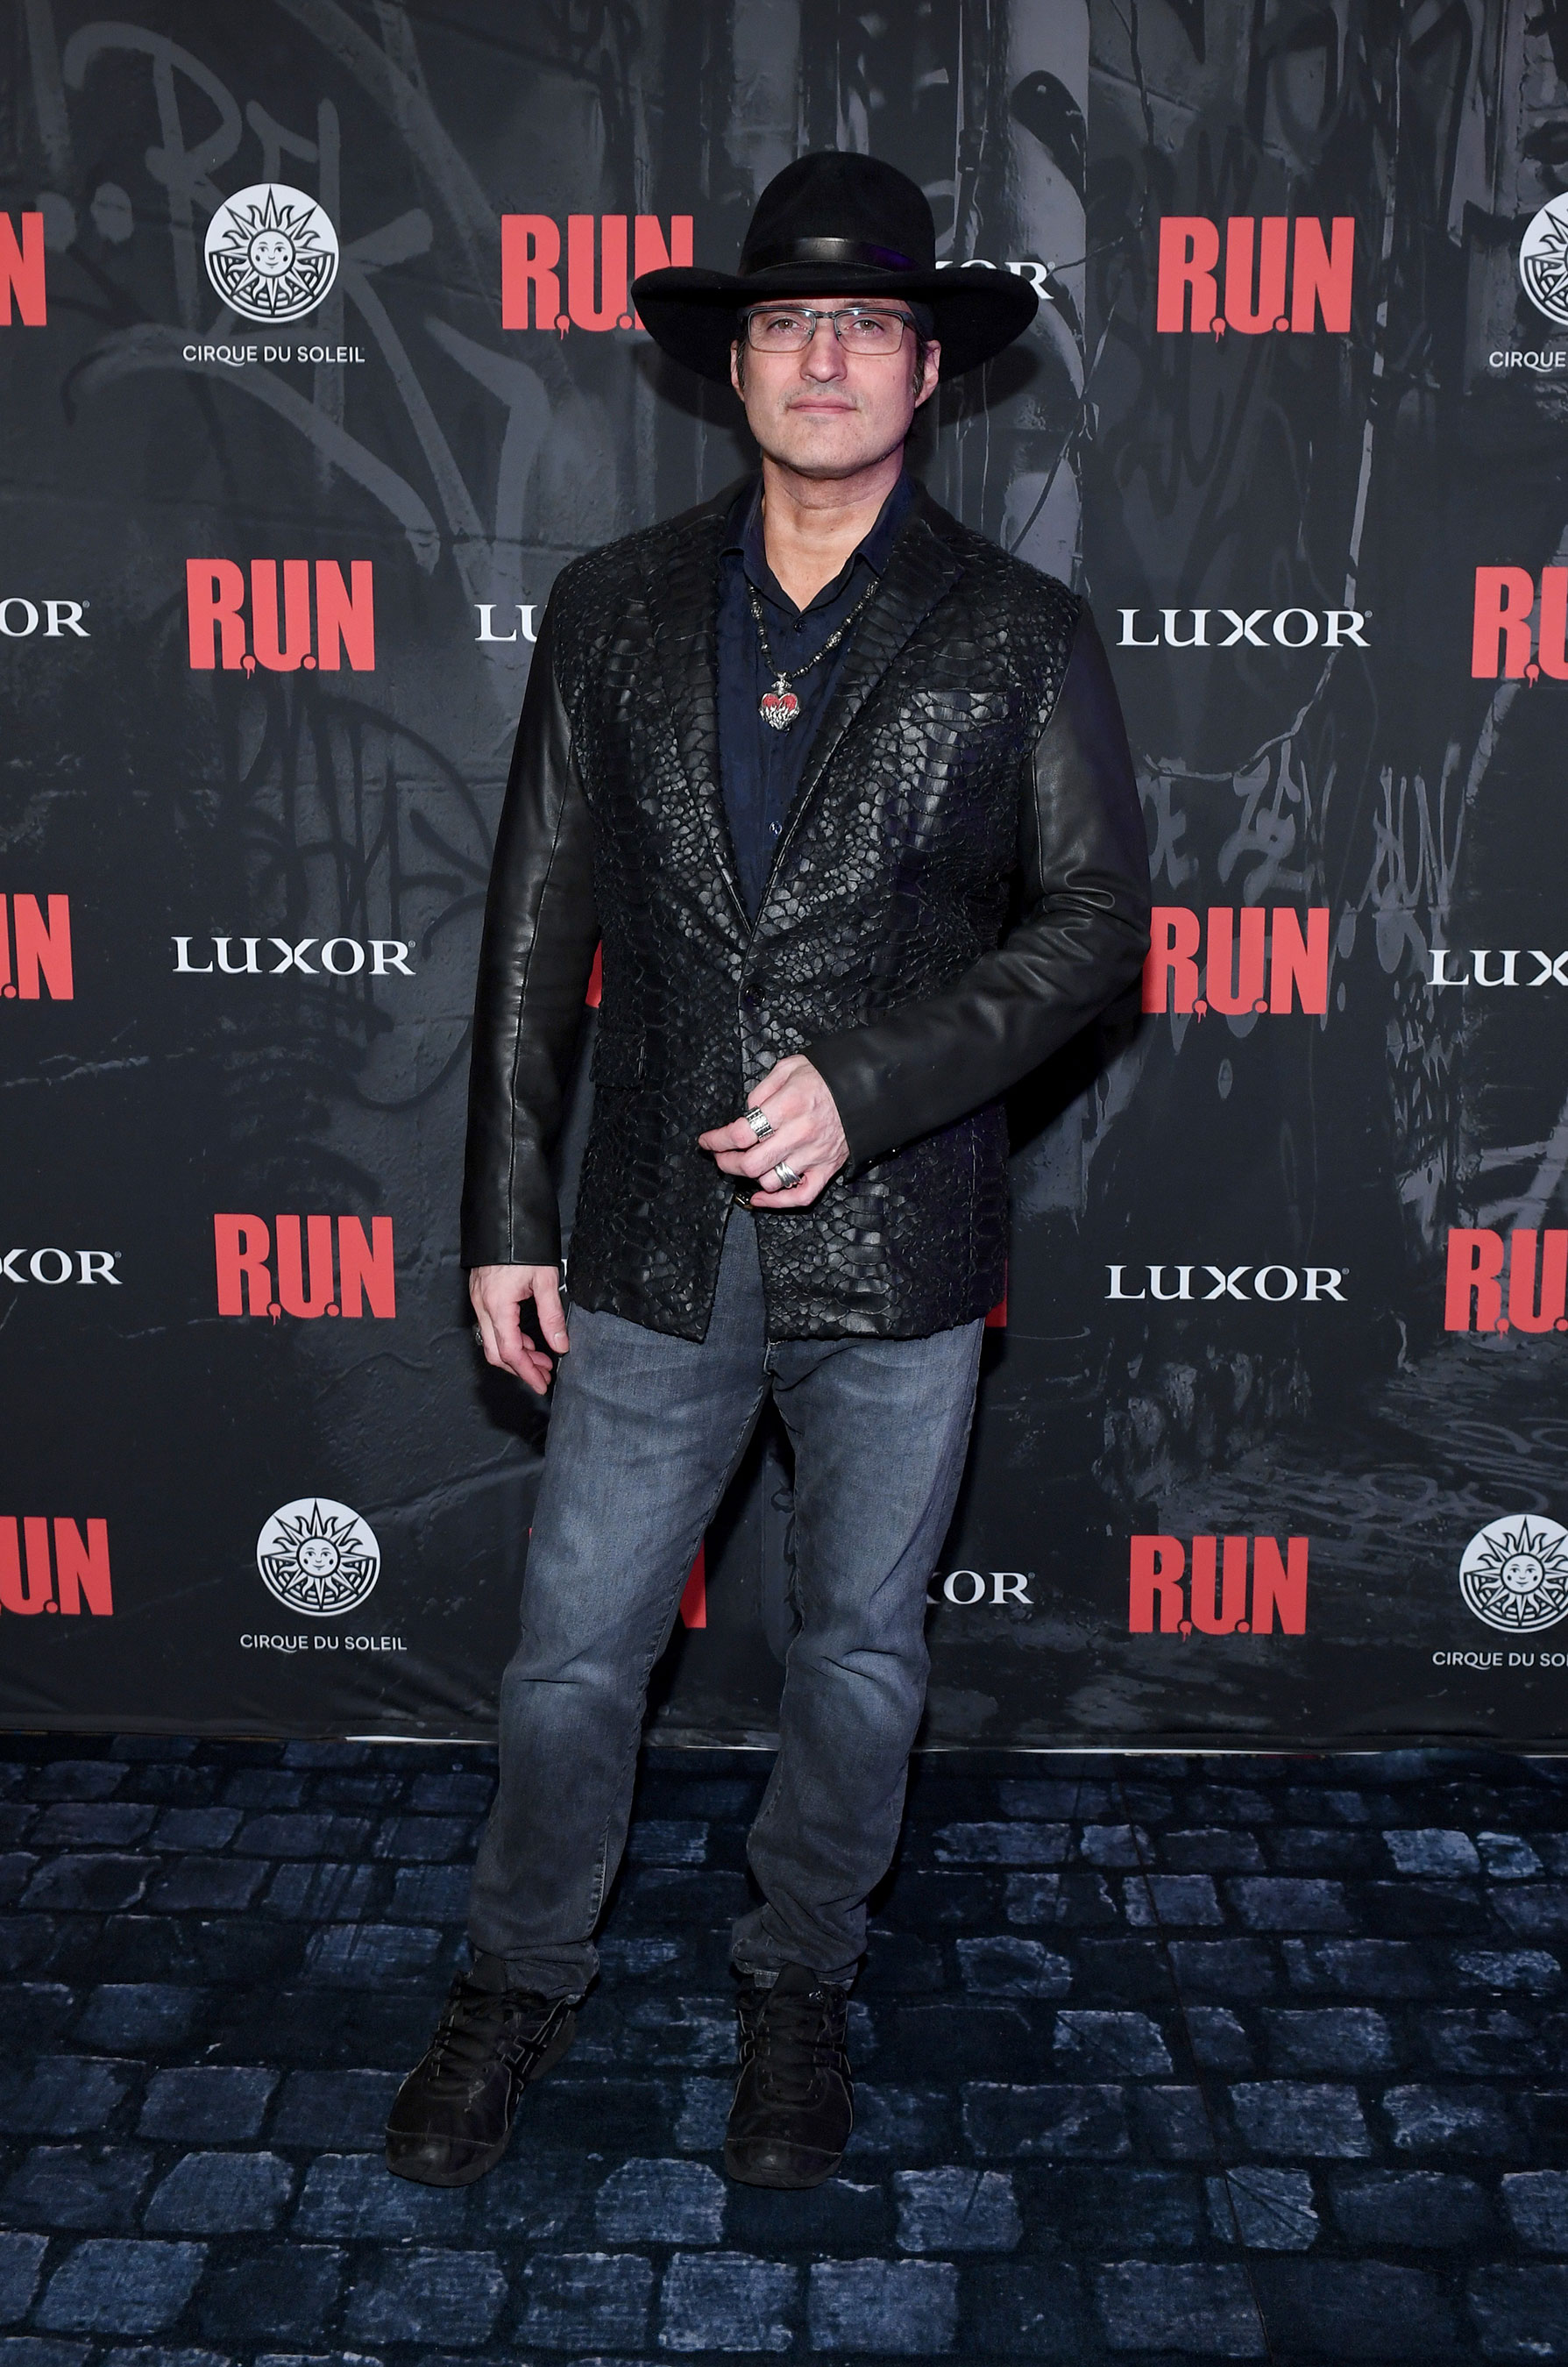 Robert Rodriguez, World-Famous Director and Writer of R.U.N Attends World Premiere at Luxor Hotel, Nov. 14